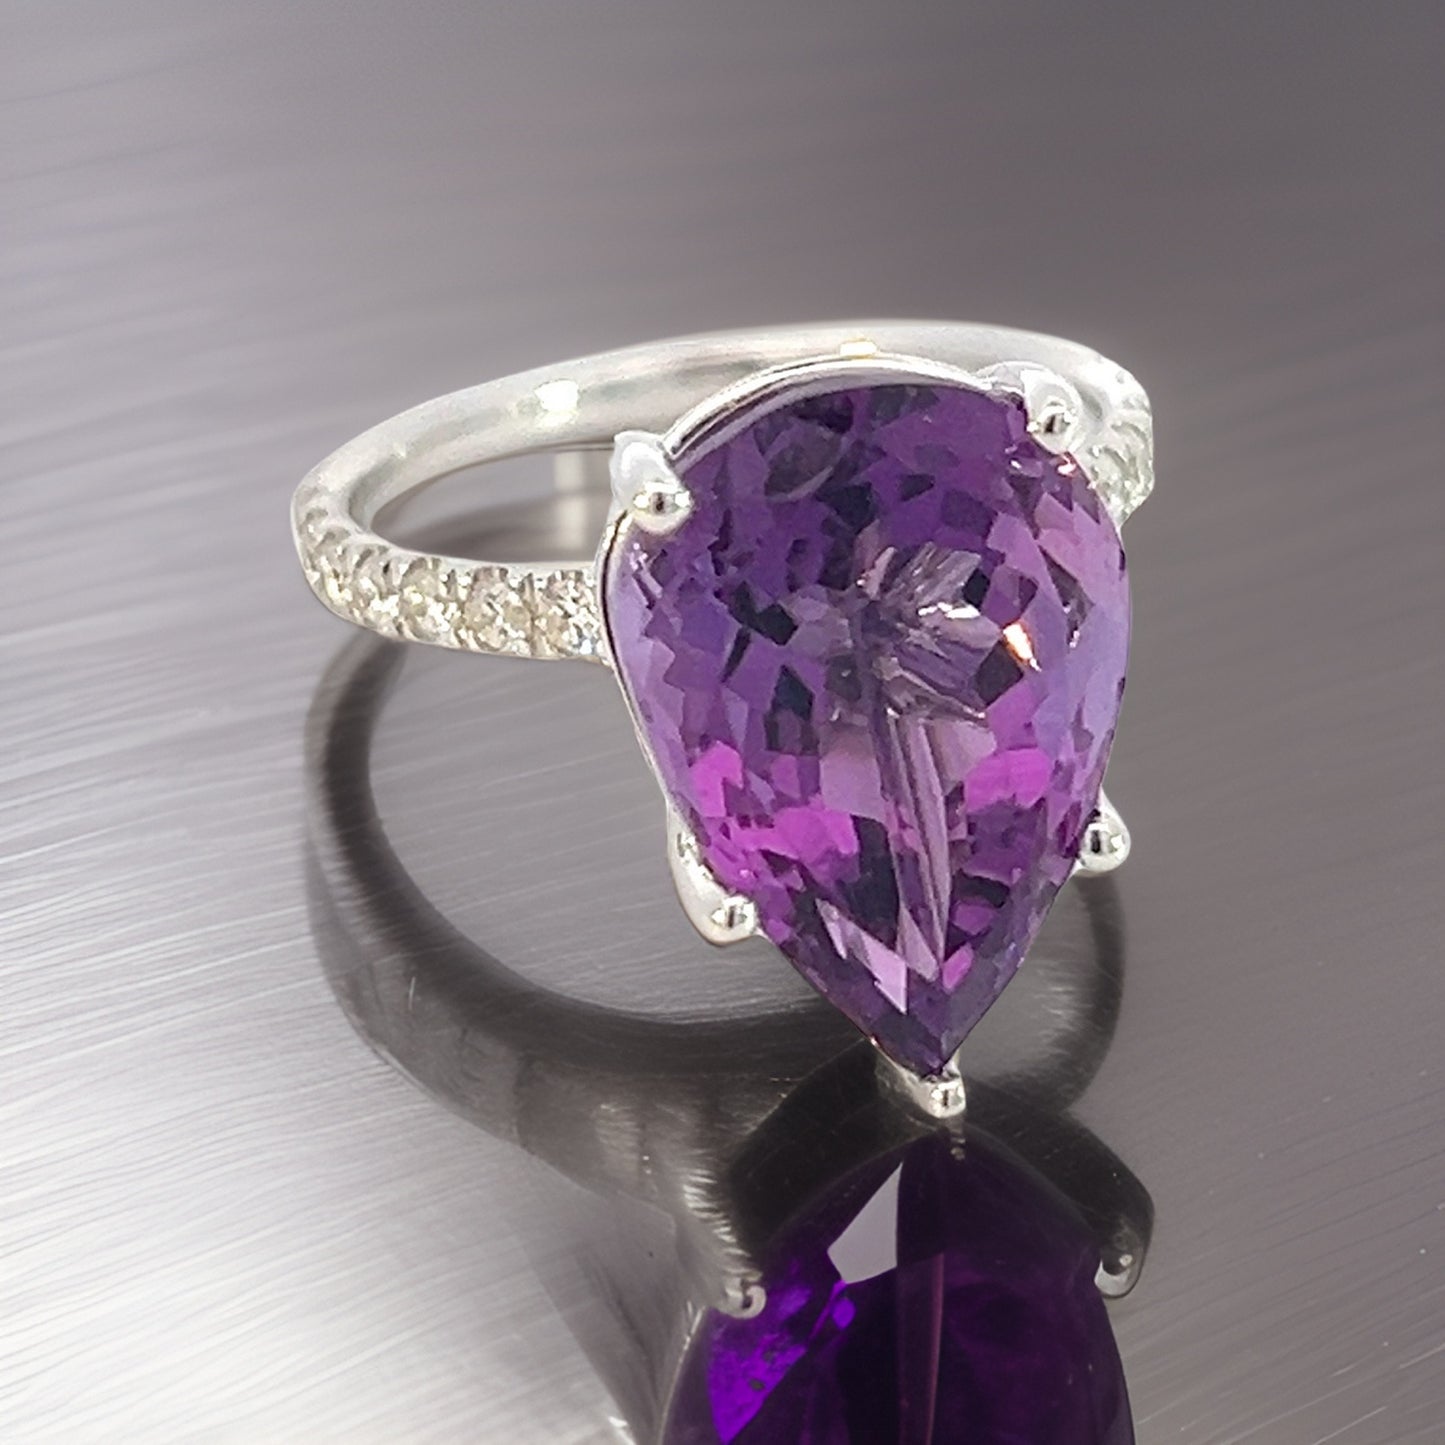 Natural Amethyst Diamond Ring 6.5 14k White Gold 7.67 TCW Certified $3,950 311006 - Certified Fine Jewelry